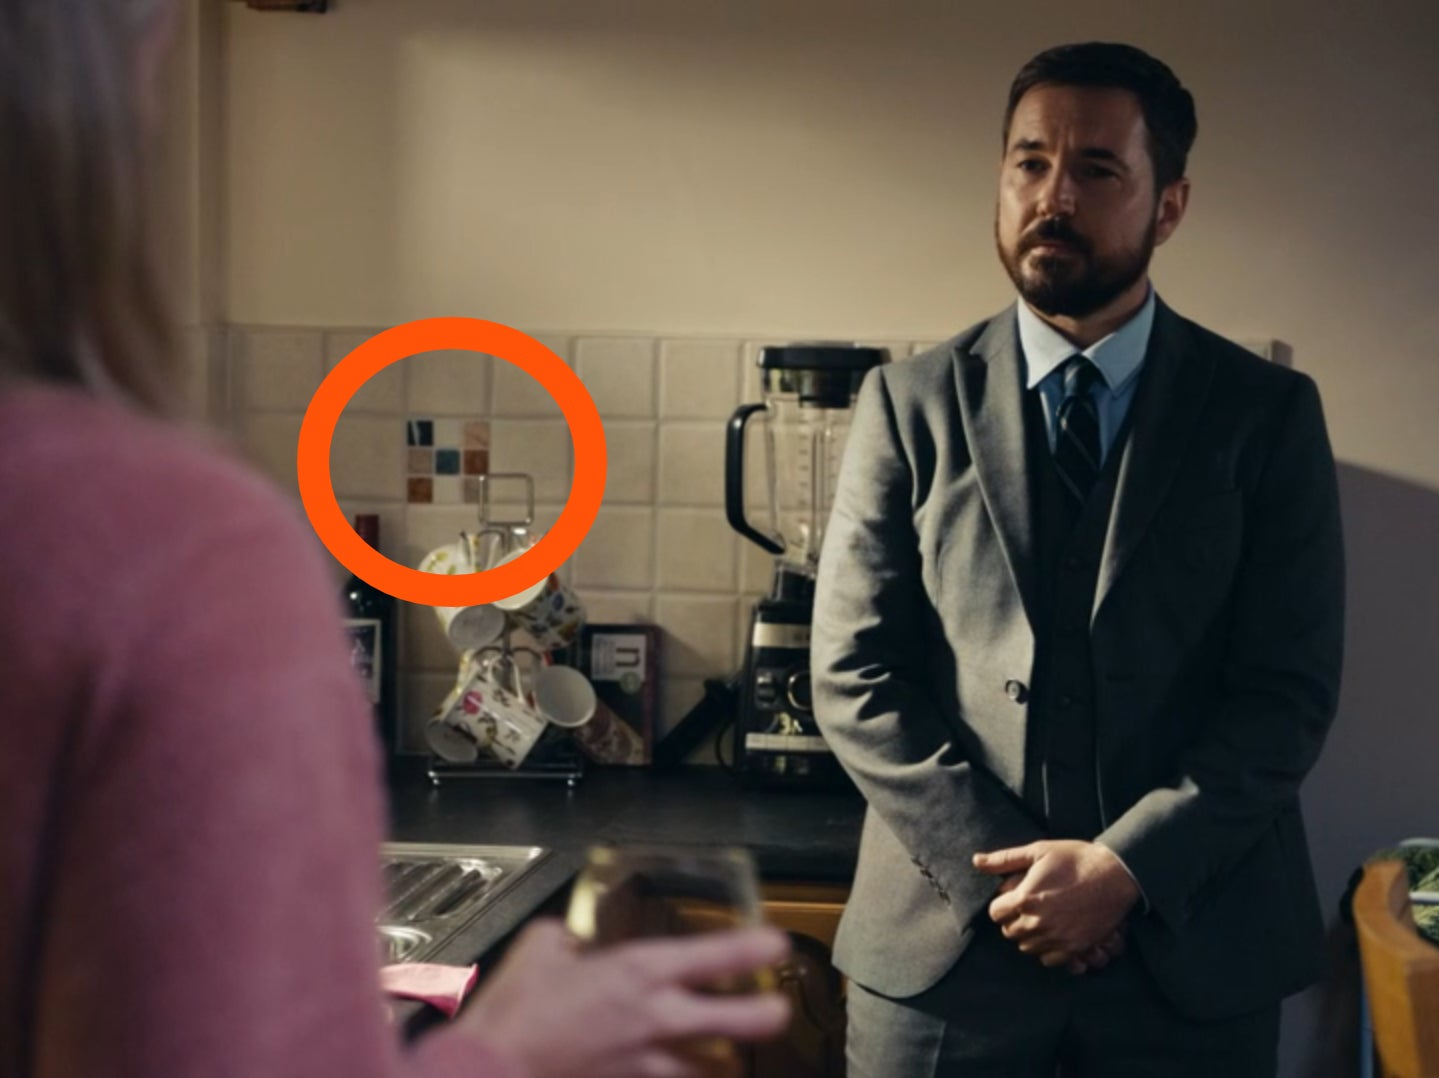 The apparent clue glimpsed in Steph Corbett’s kitchen tiling in Line of Duty episode 3